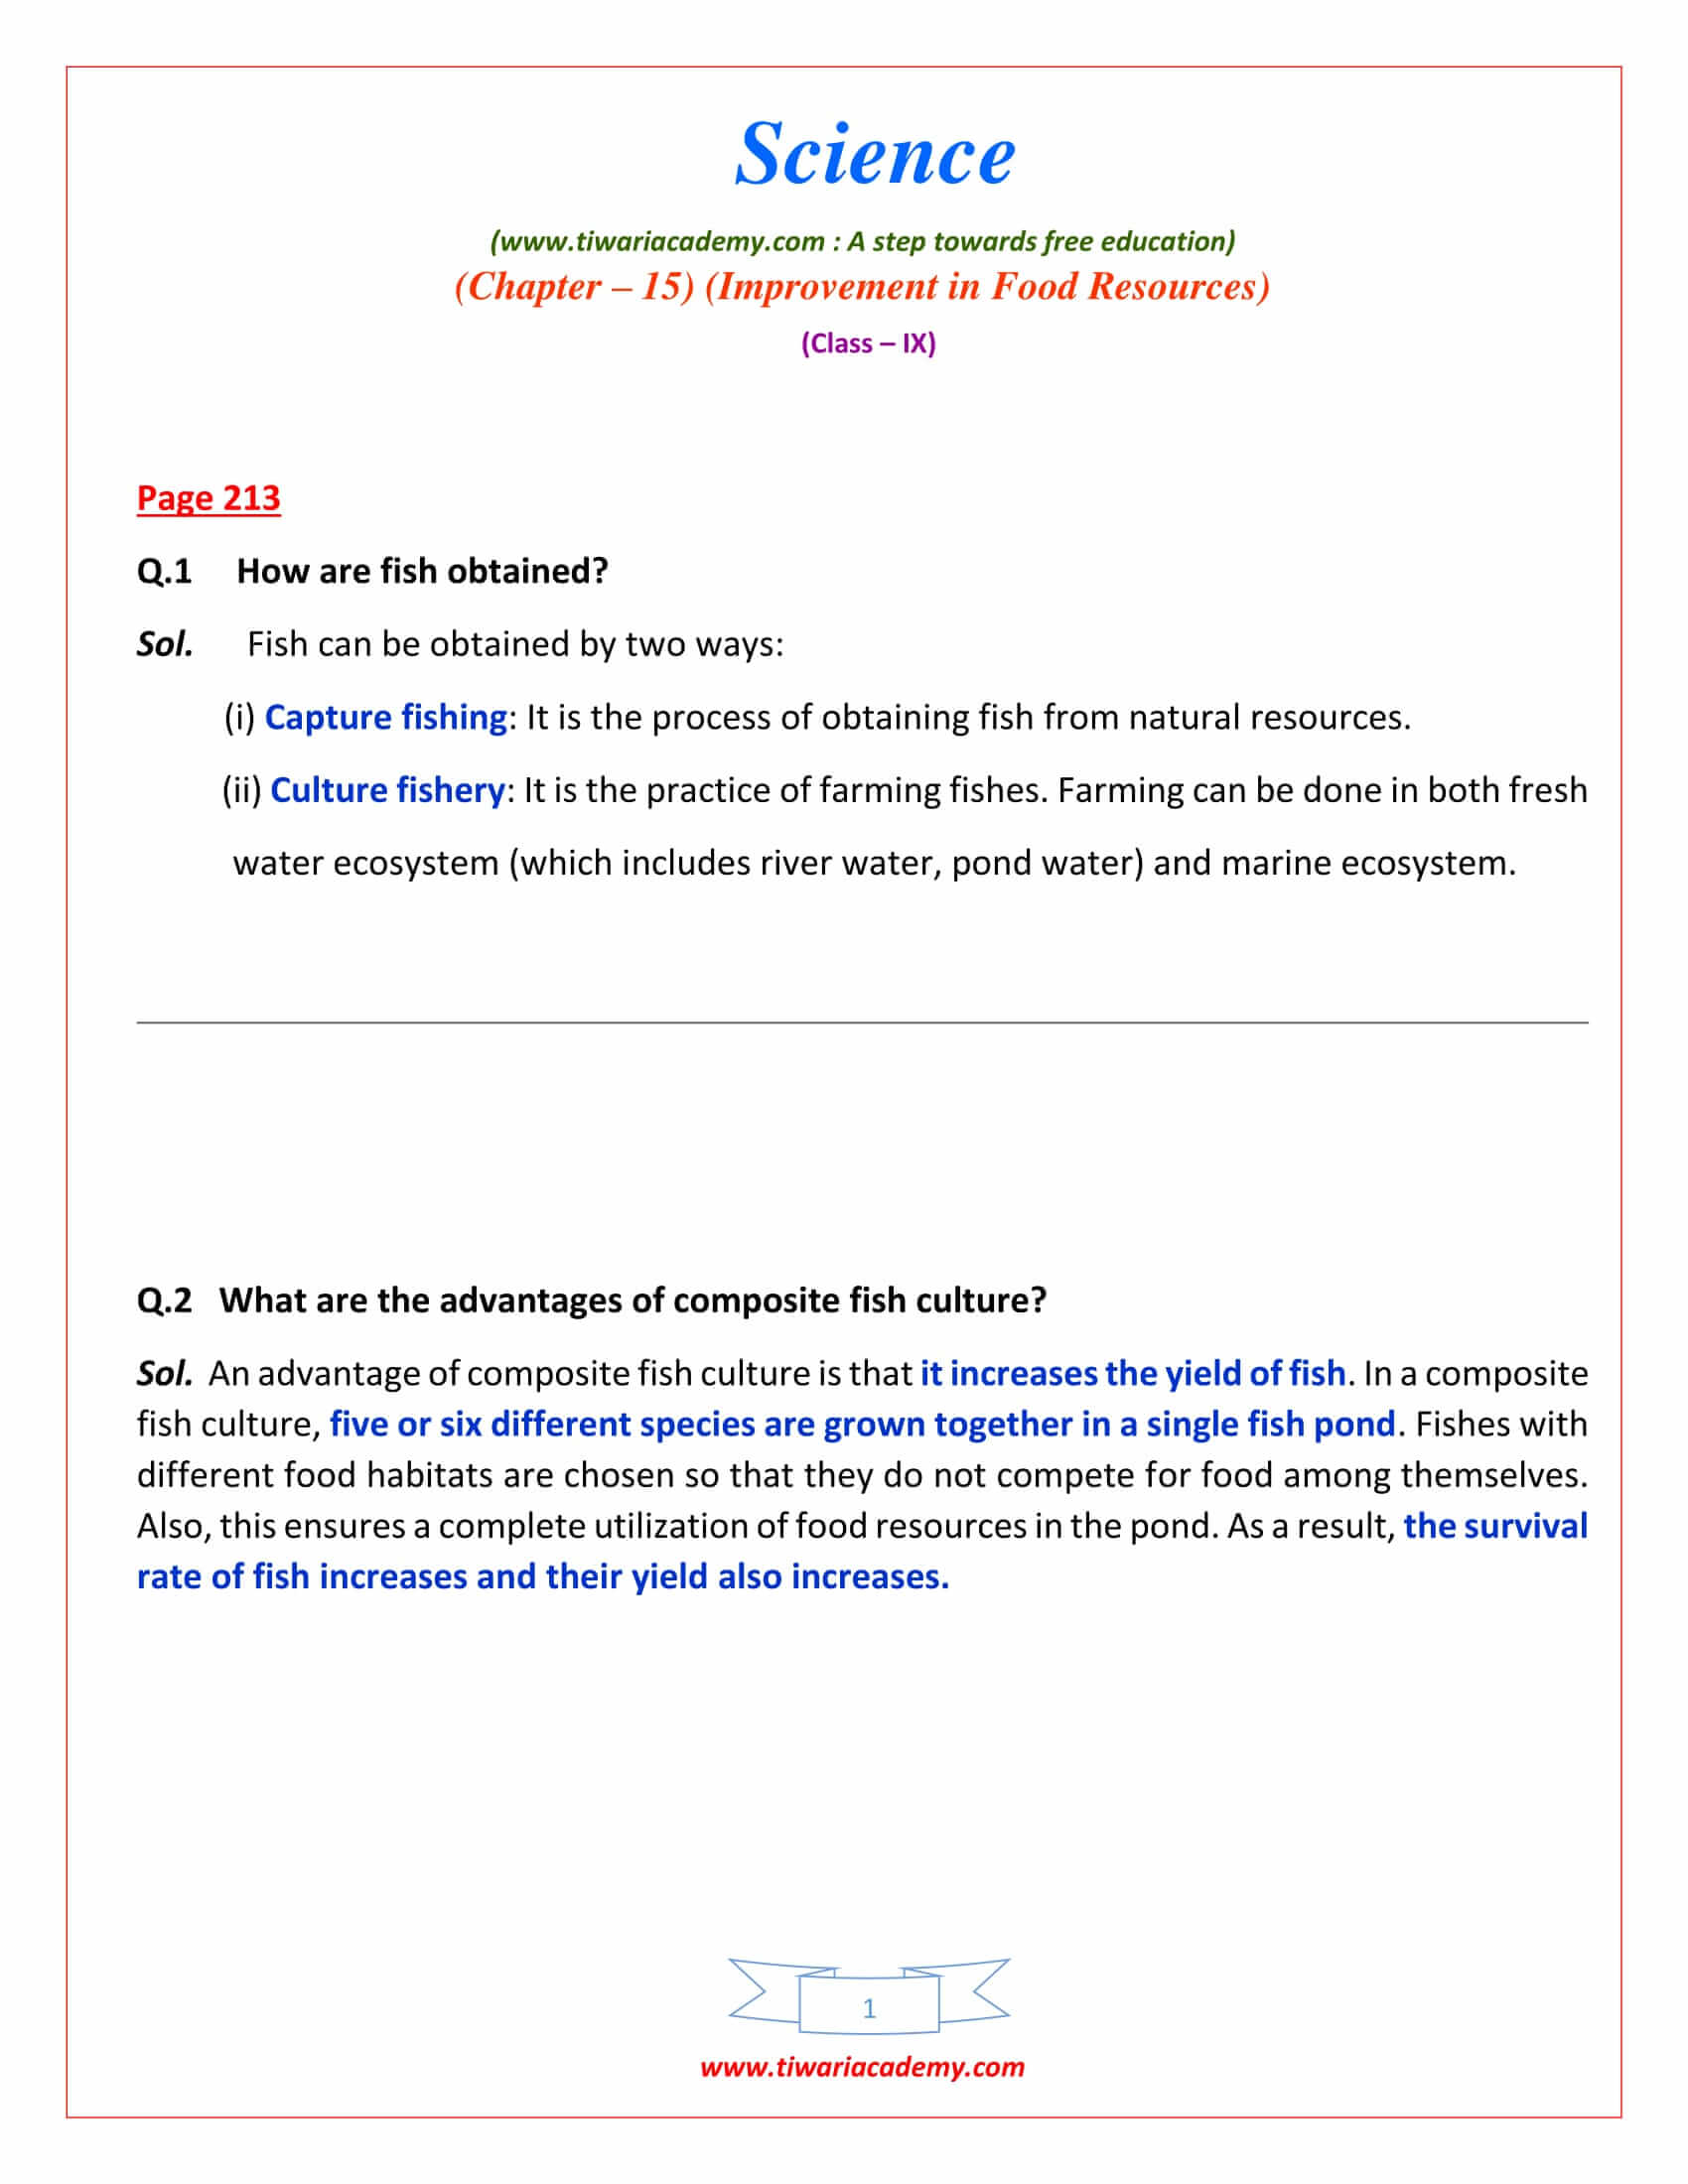 Class 9 Science Chapter 15 Improvement in Food Resources Intext Question answers on Page 213